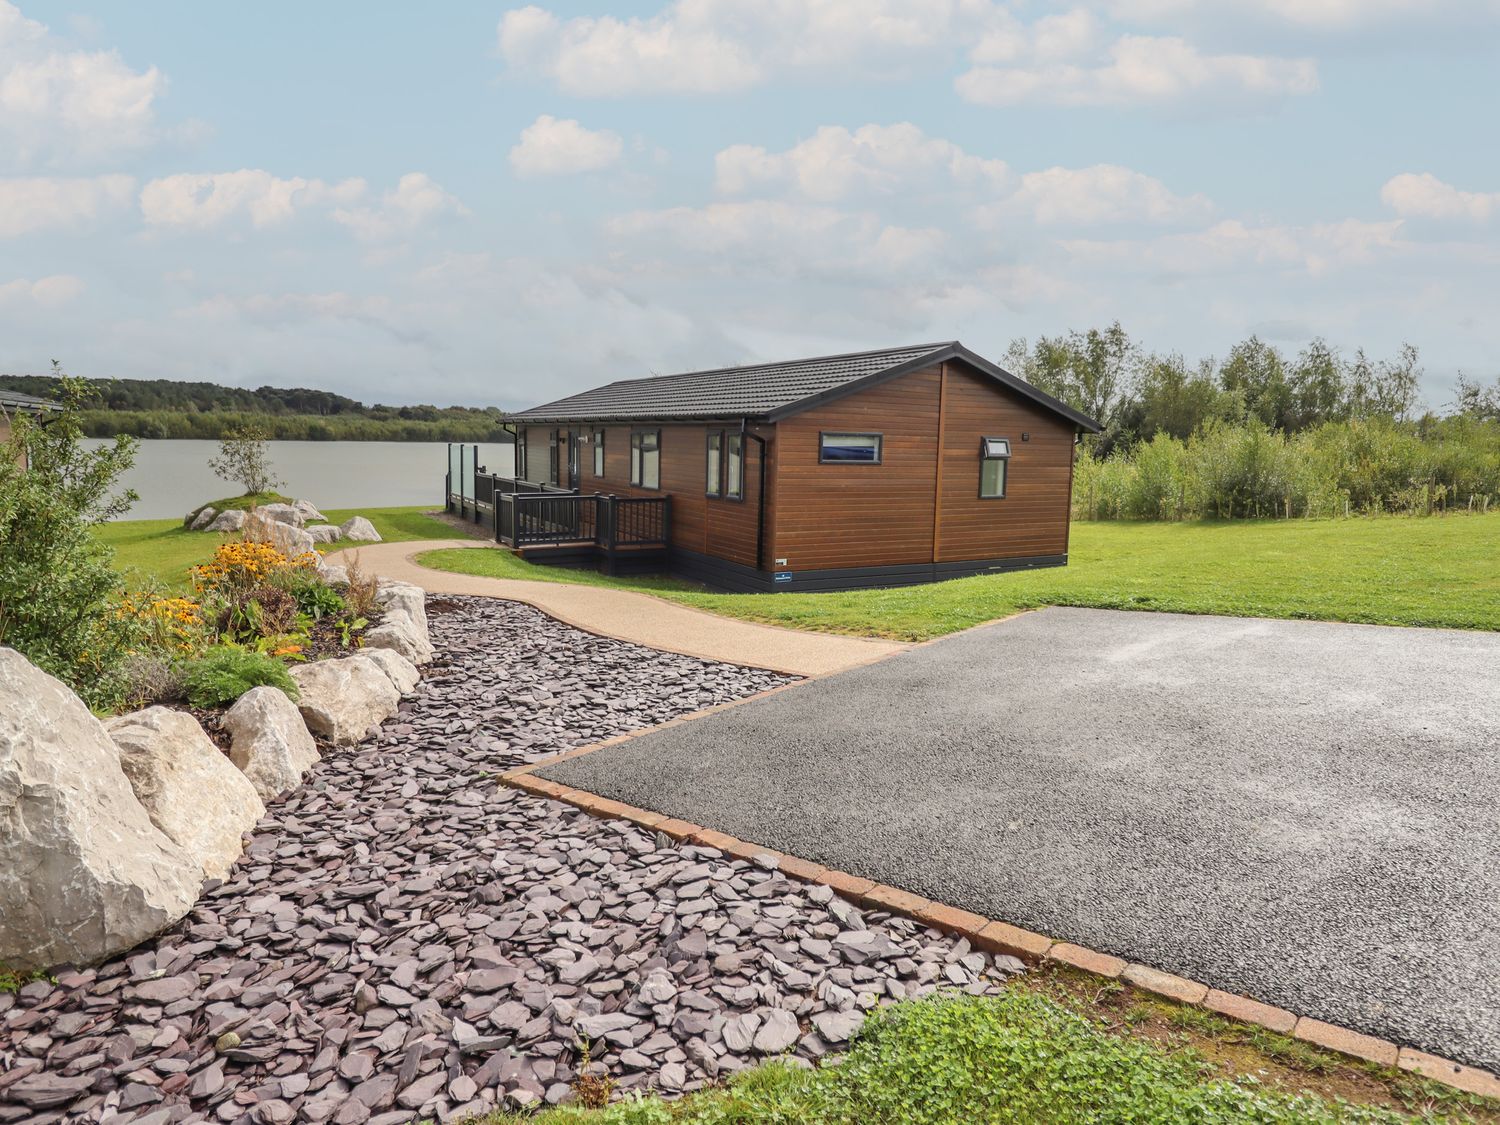 40 Delamere Point - North Wales - 1141584 - photo 1